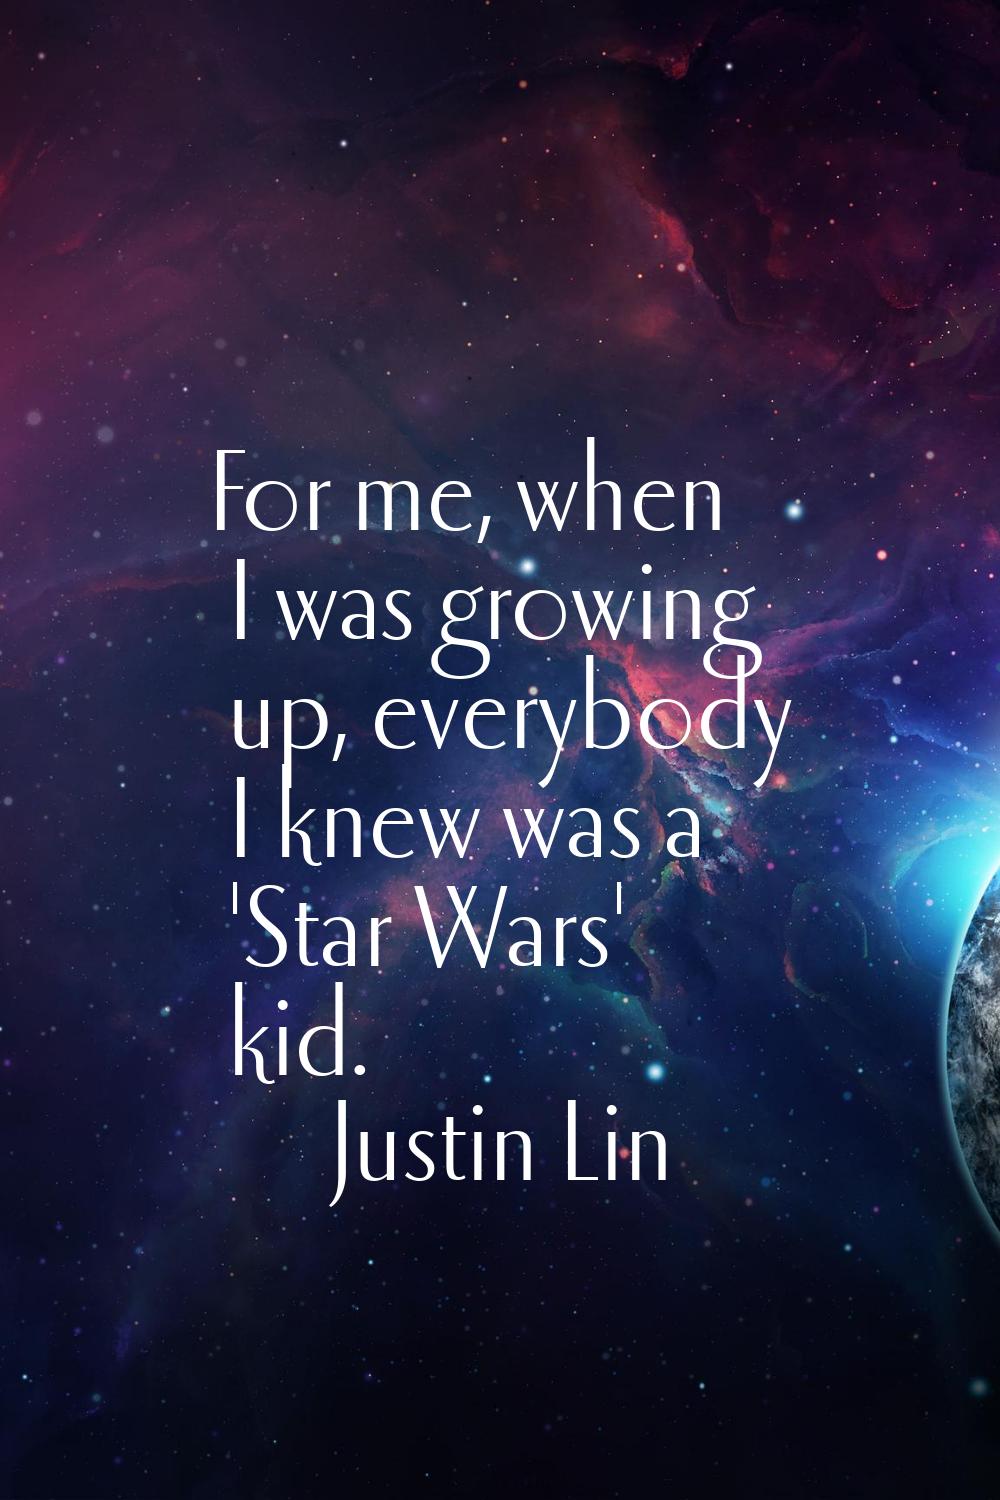 For me, when I was growing up, everybody I knew was a 'Star Wars' kid.